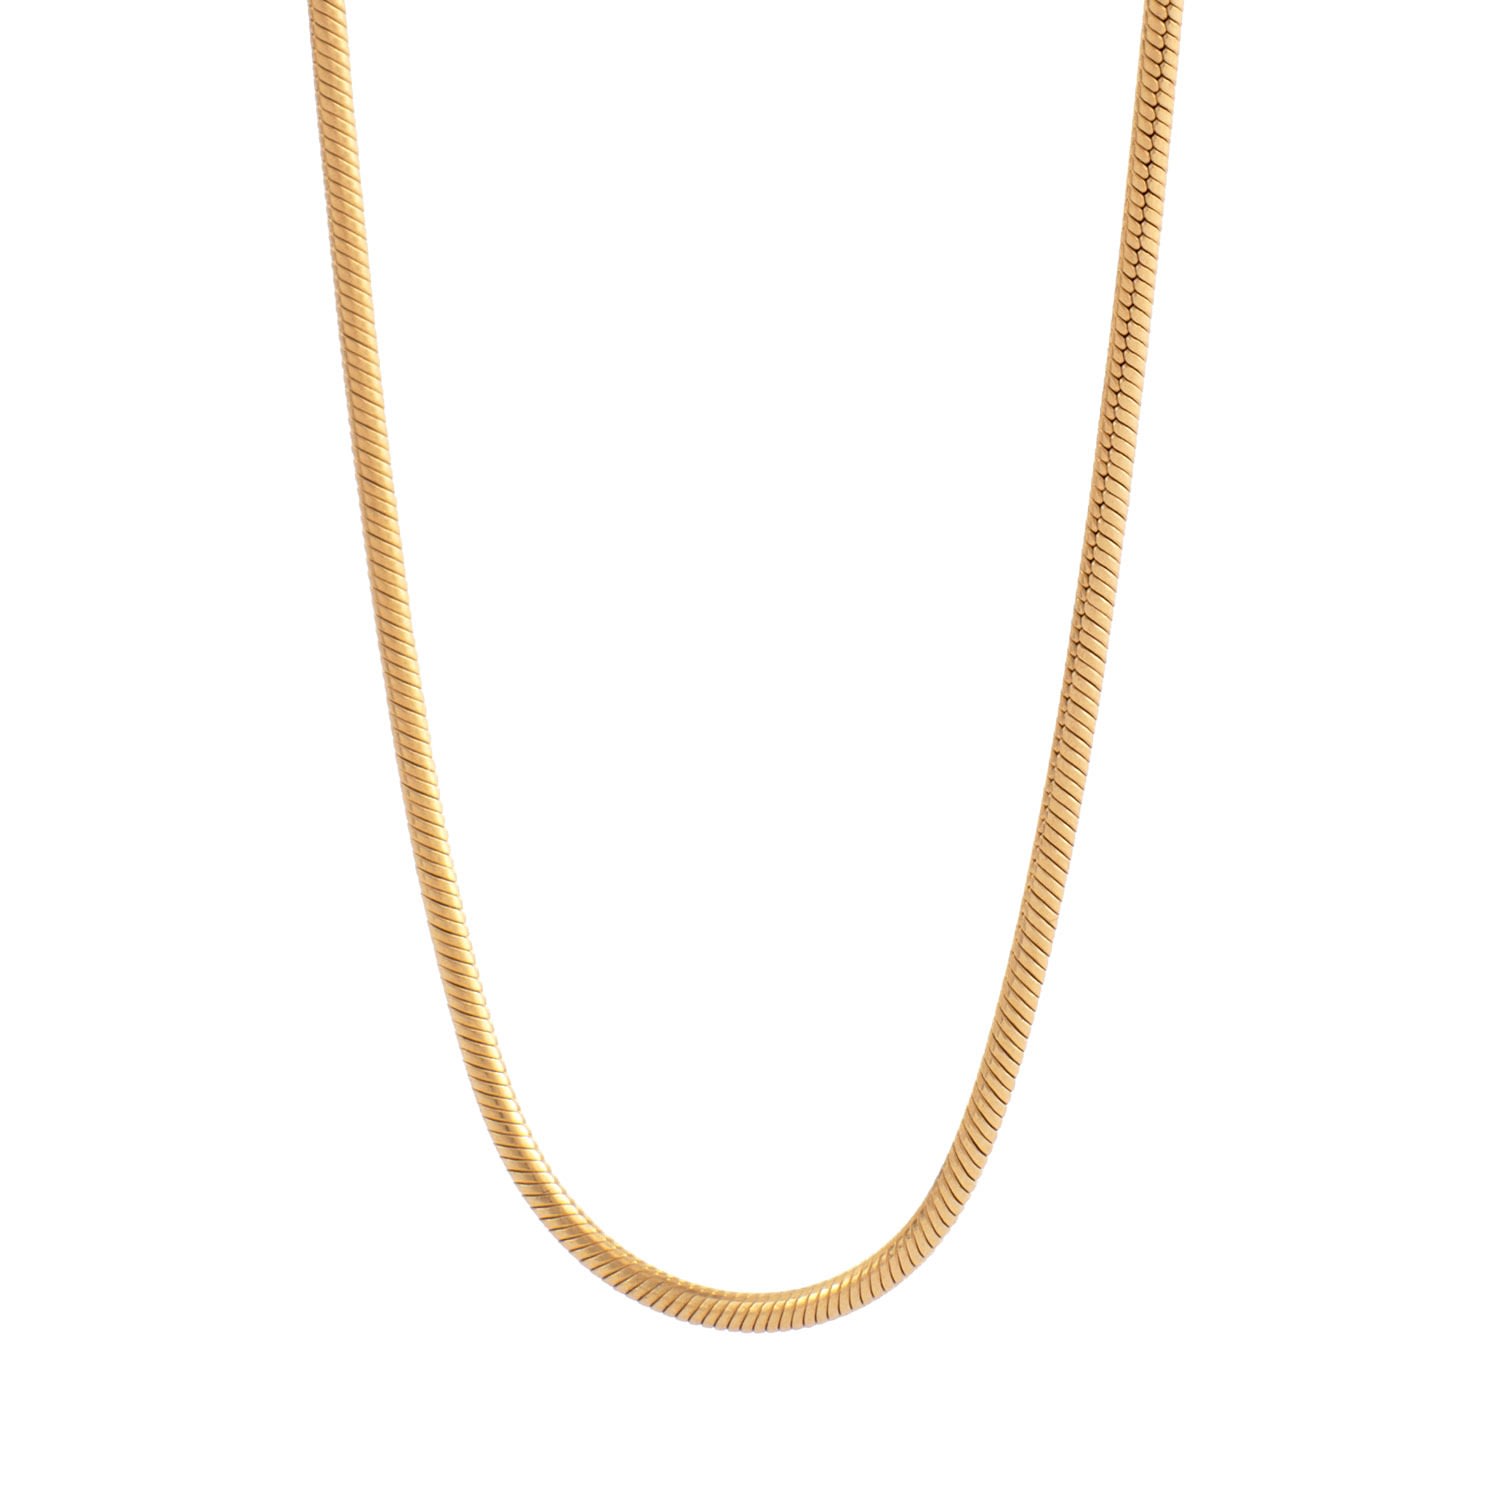 Women’s Gold Snake Chain Necklace Buvy Jewellery